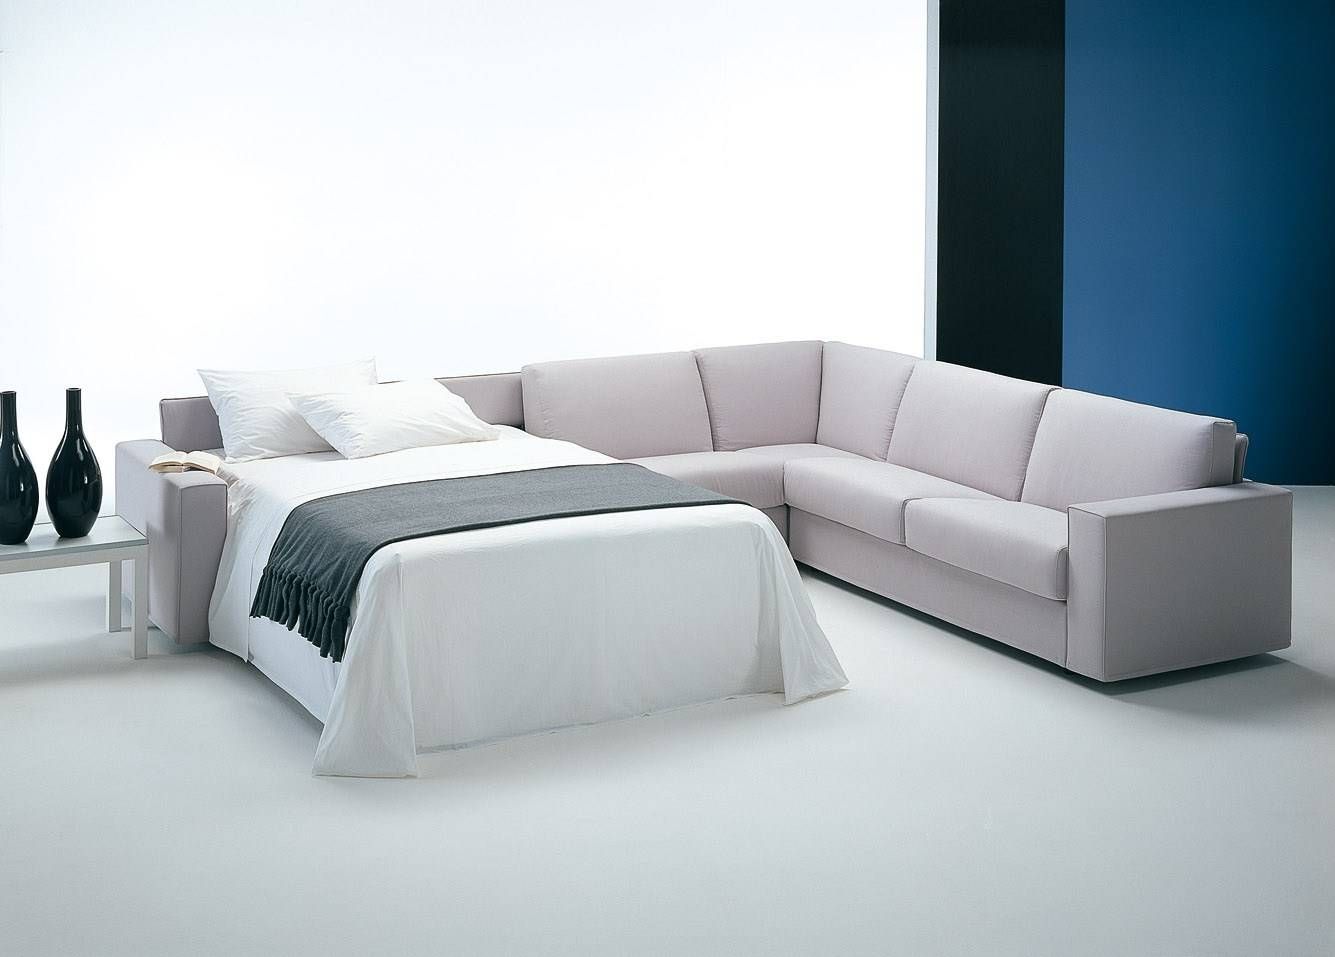 giant square sofa bed